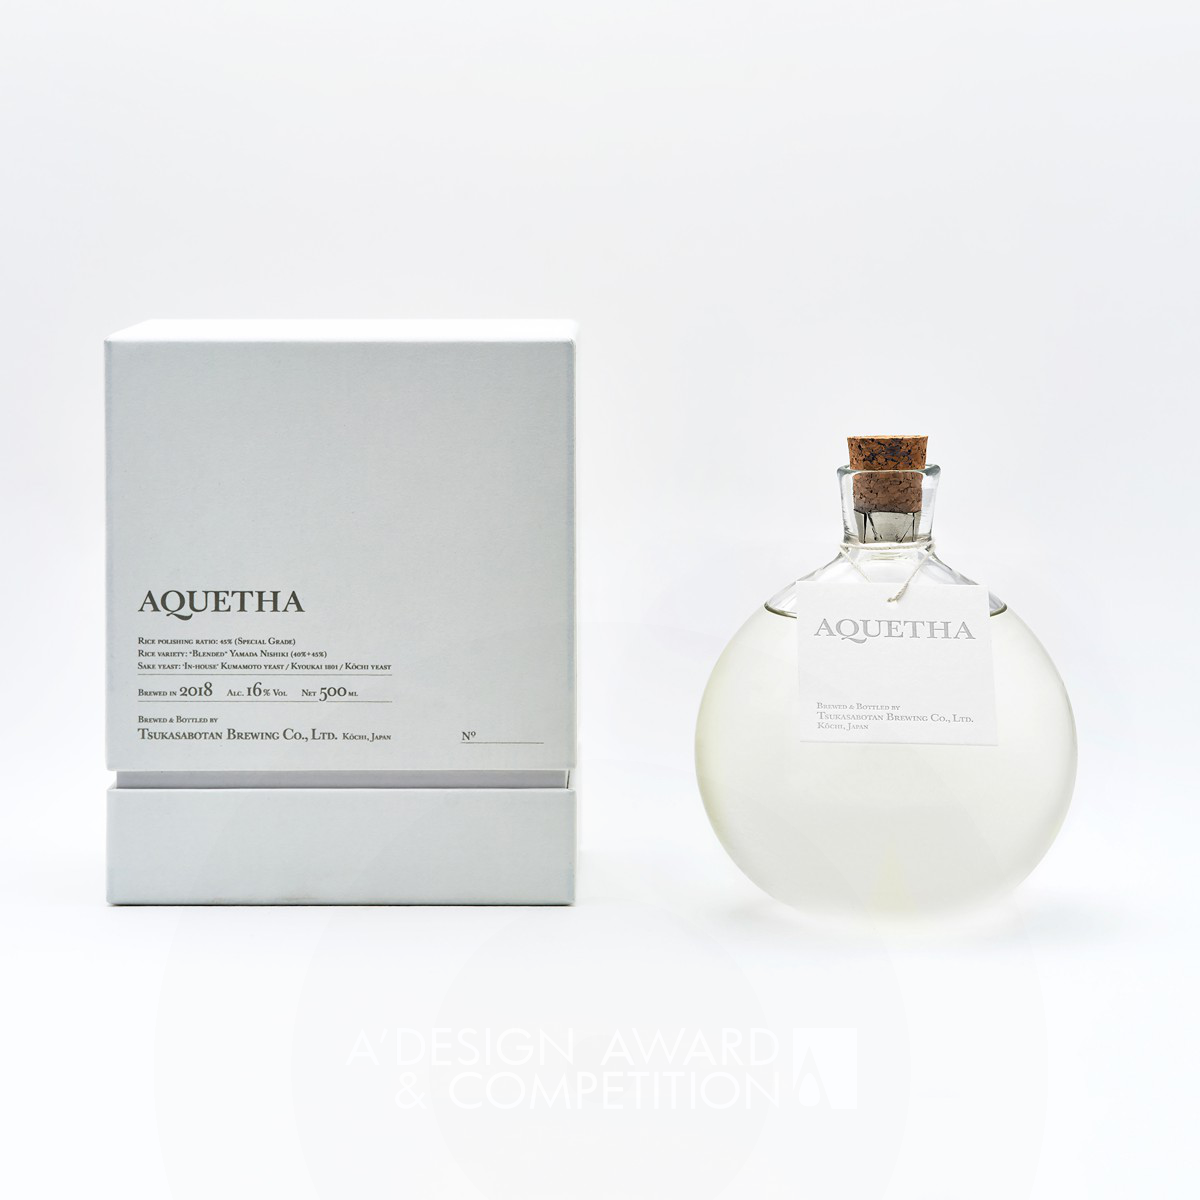 Aquetha Branding and Packaging by tacto inc.